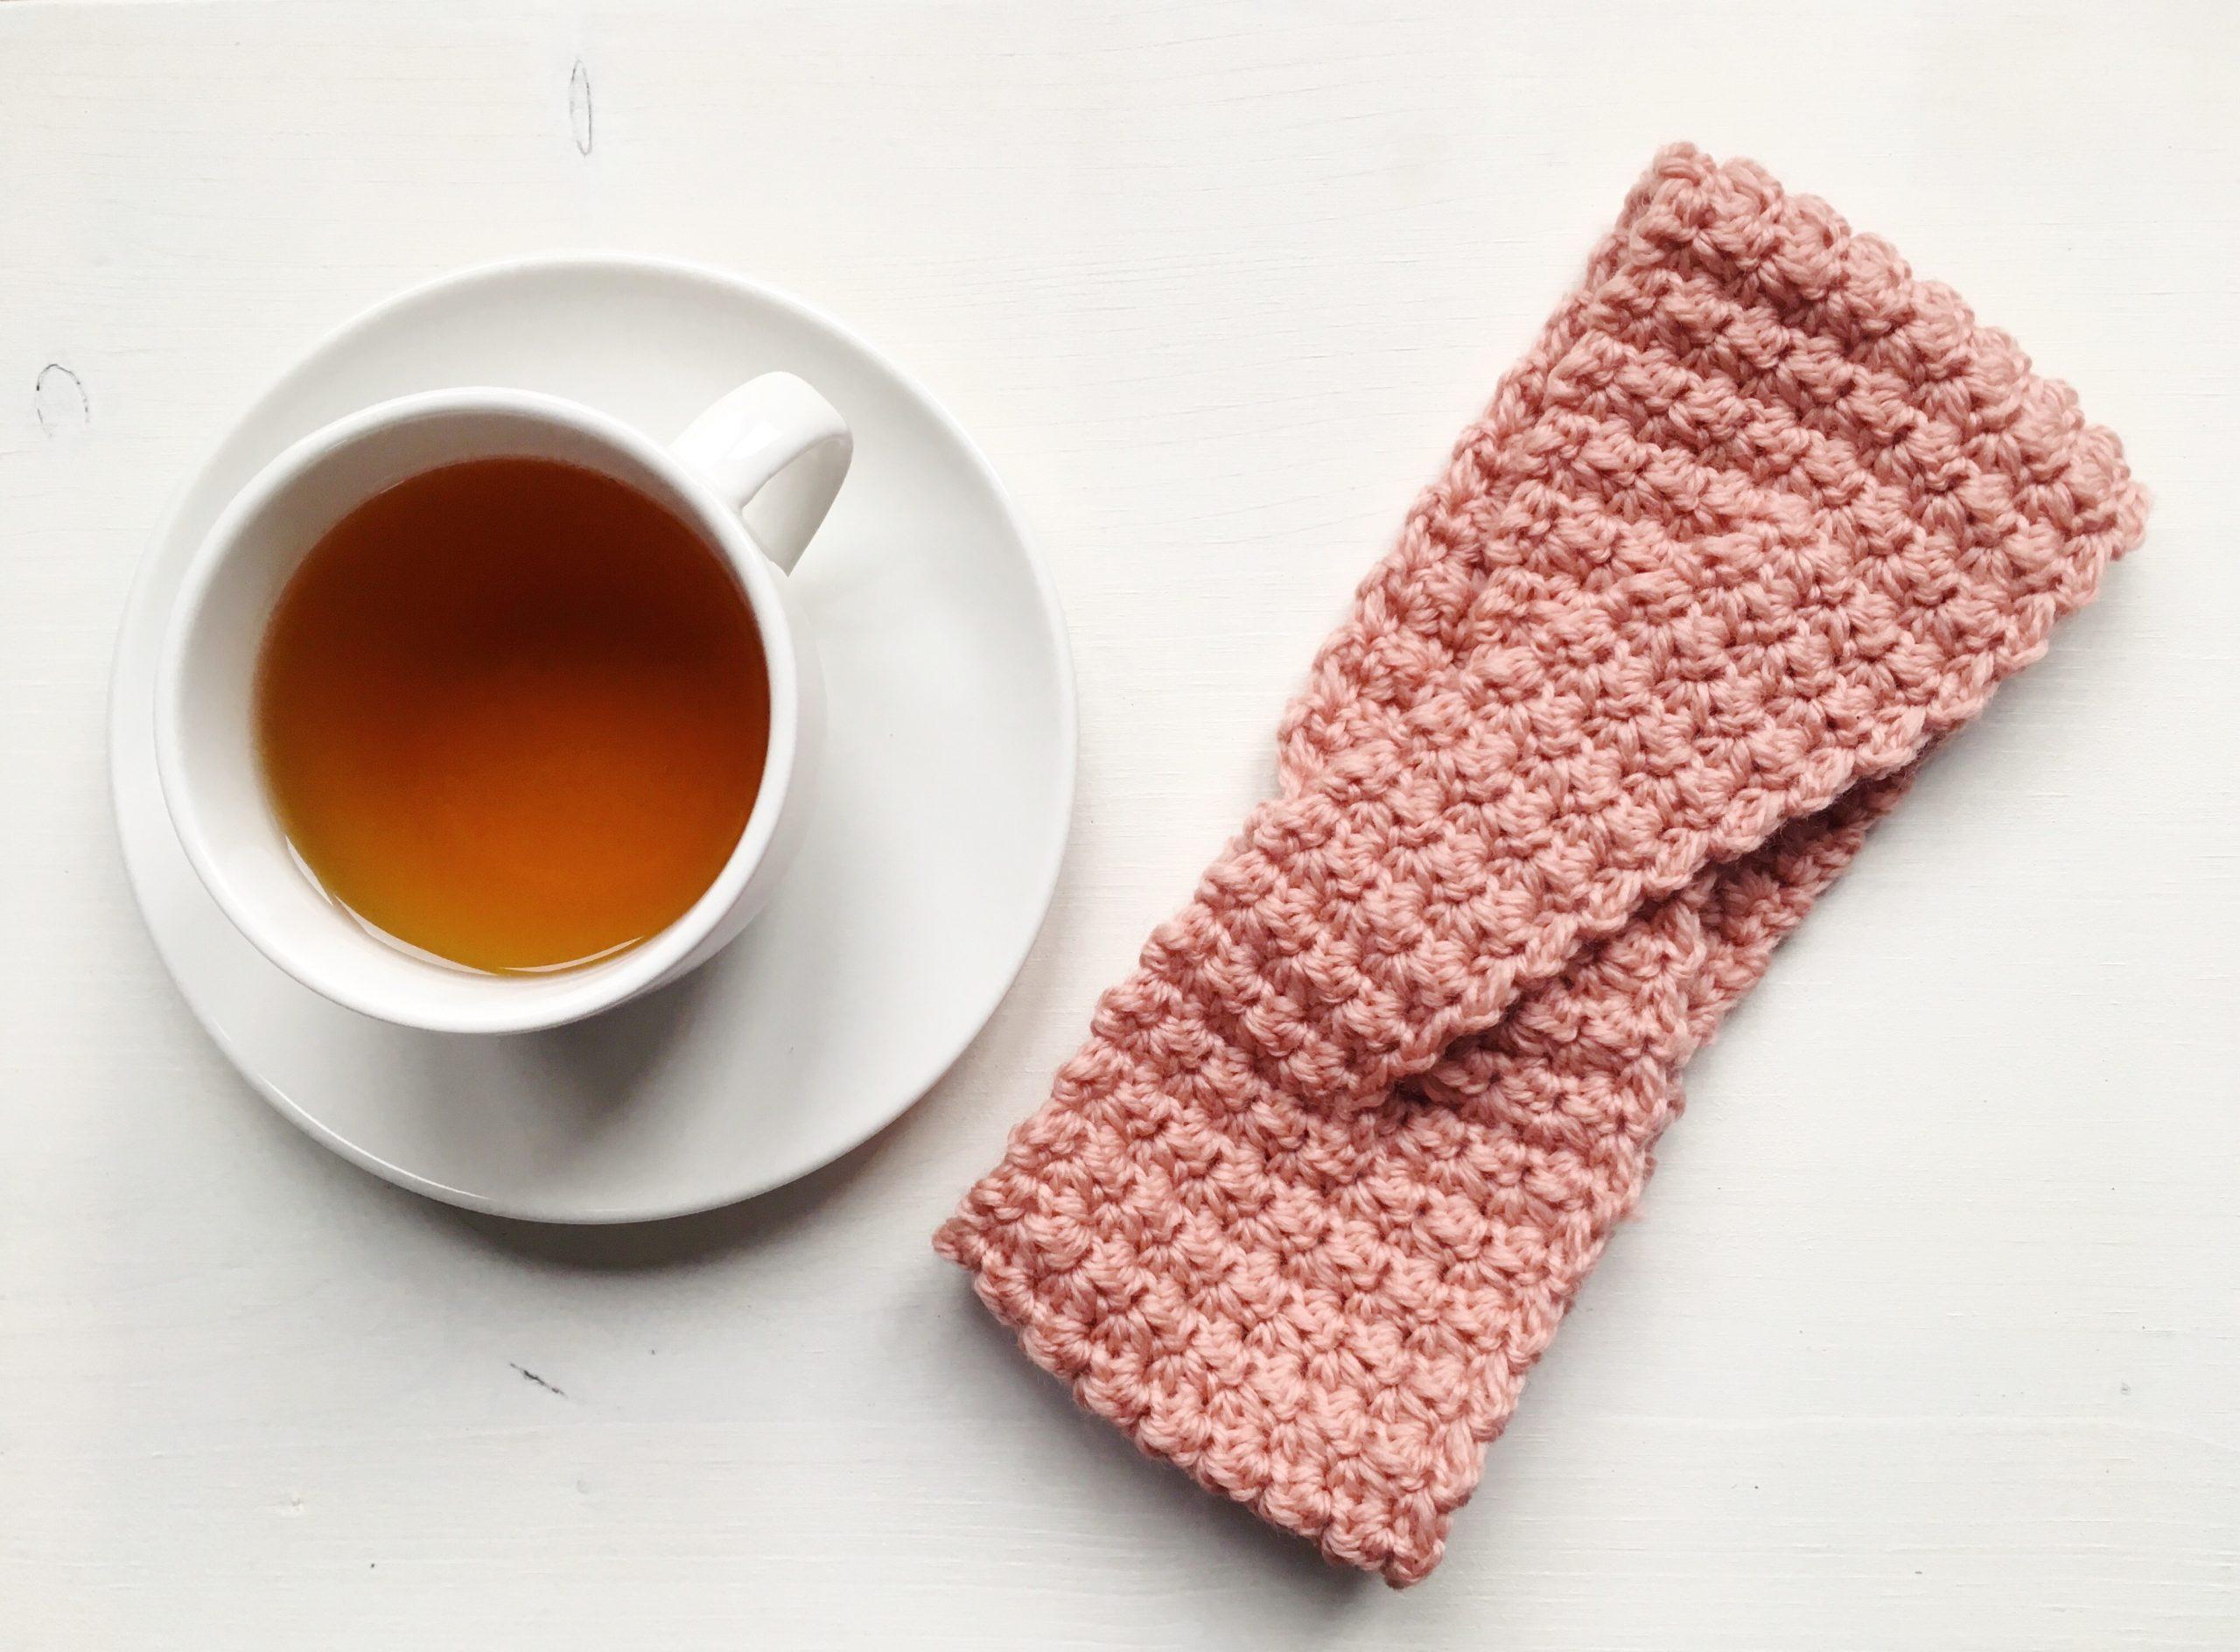 a muted pink crochet headband lay flat alongside a cup of tea on a white backdrop.